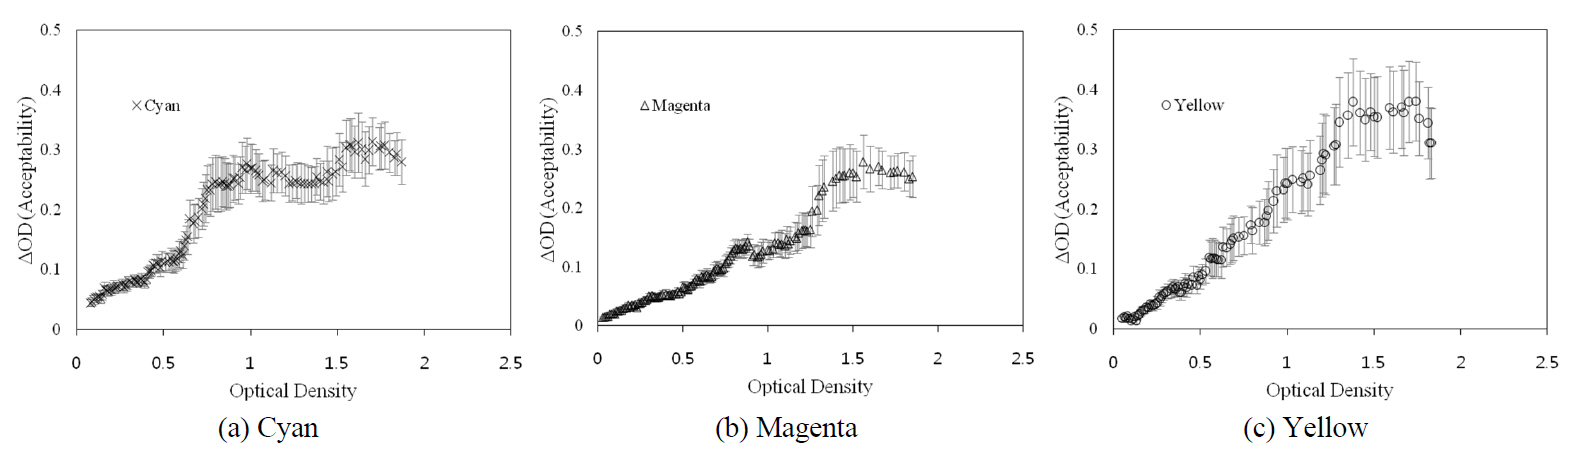 Acceptability: OD vs. mean acceptability thresholds in OD unit for (a) cyan (b) magenta and (c) yellow scales.